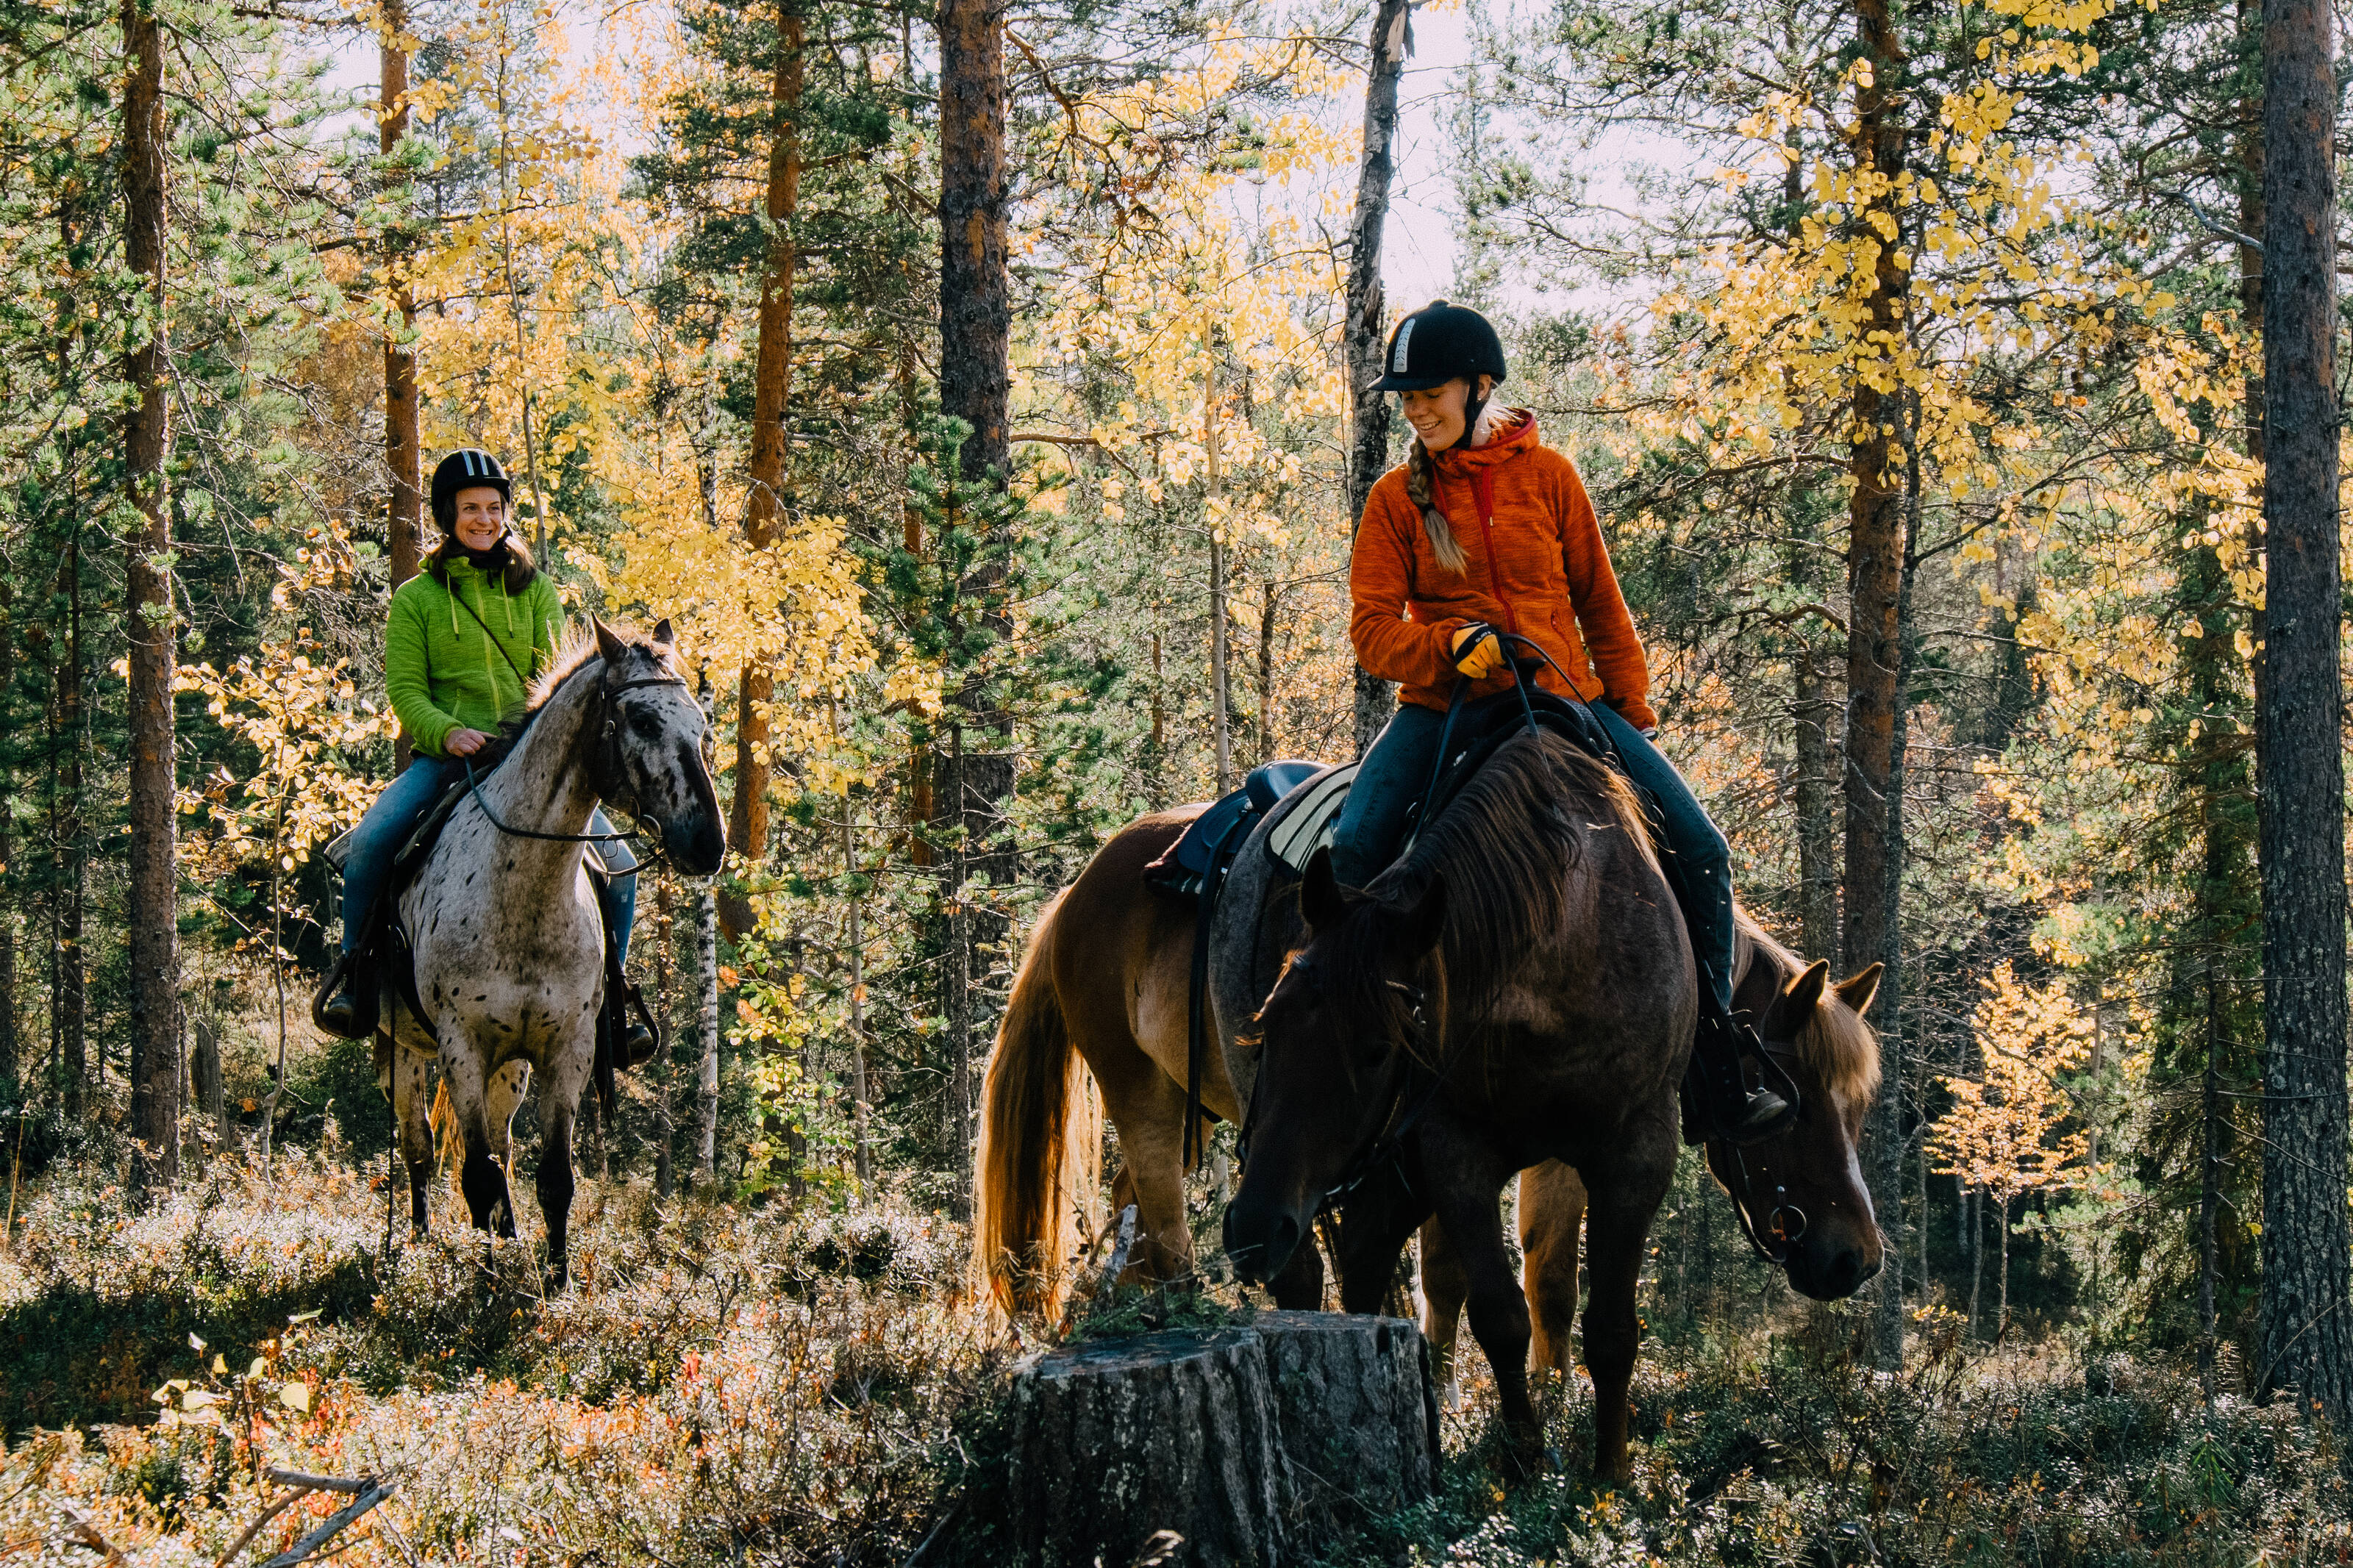 Two people ride through a Finnish forest on horseback.